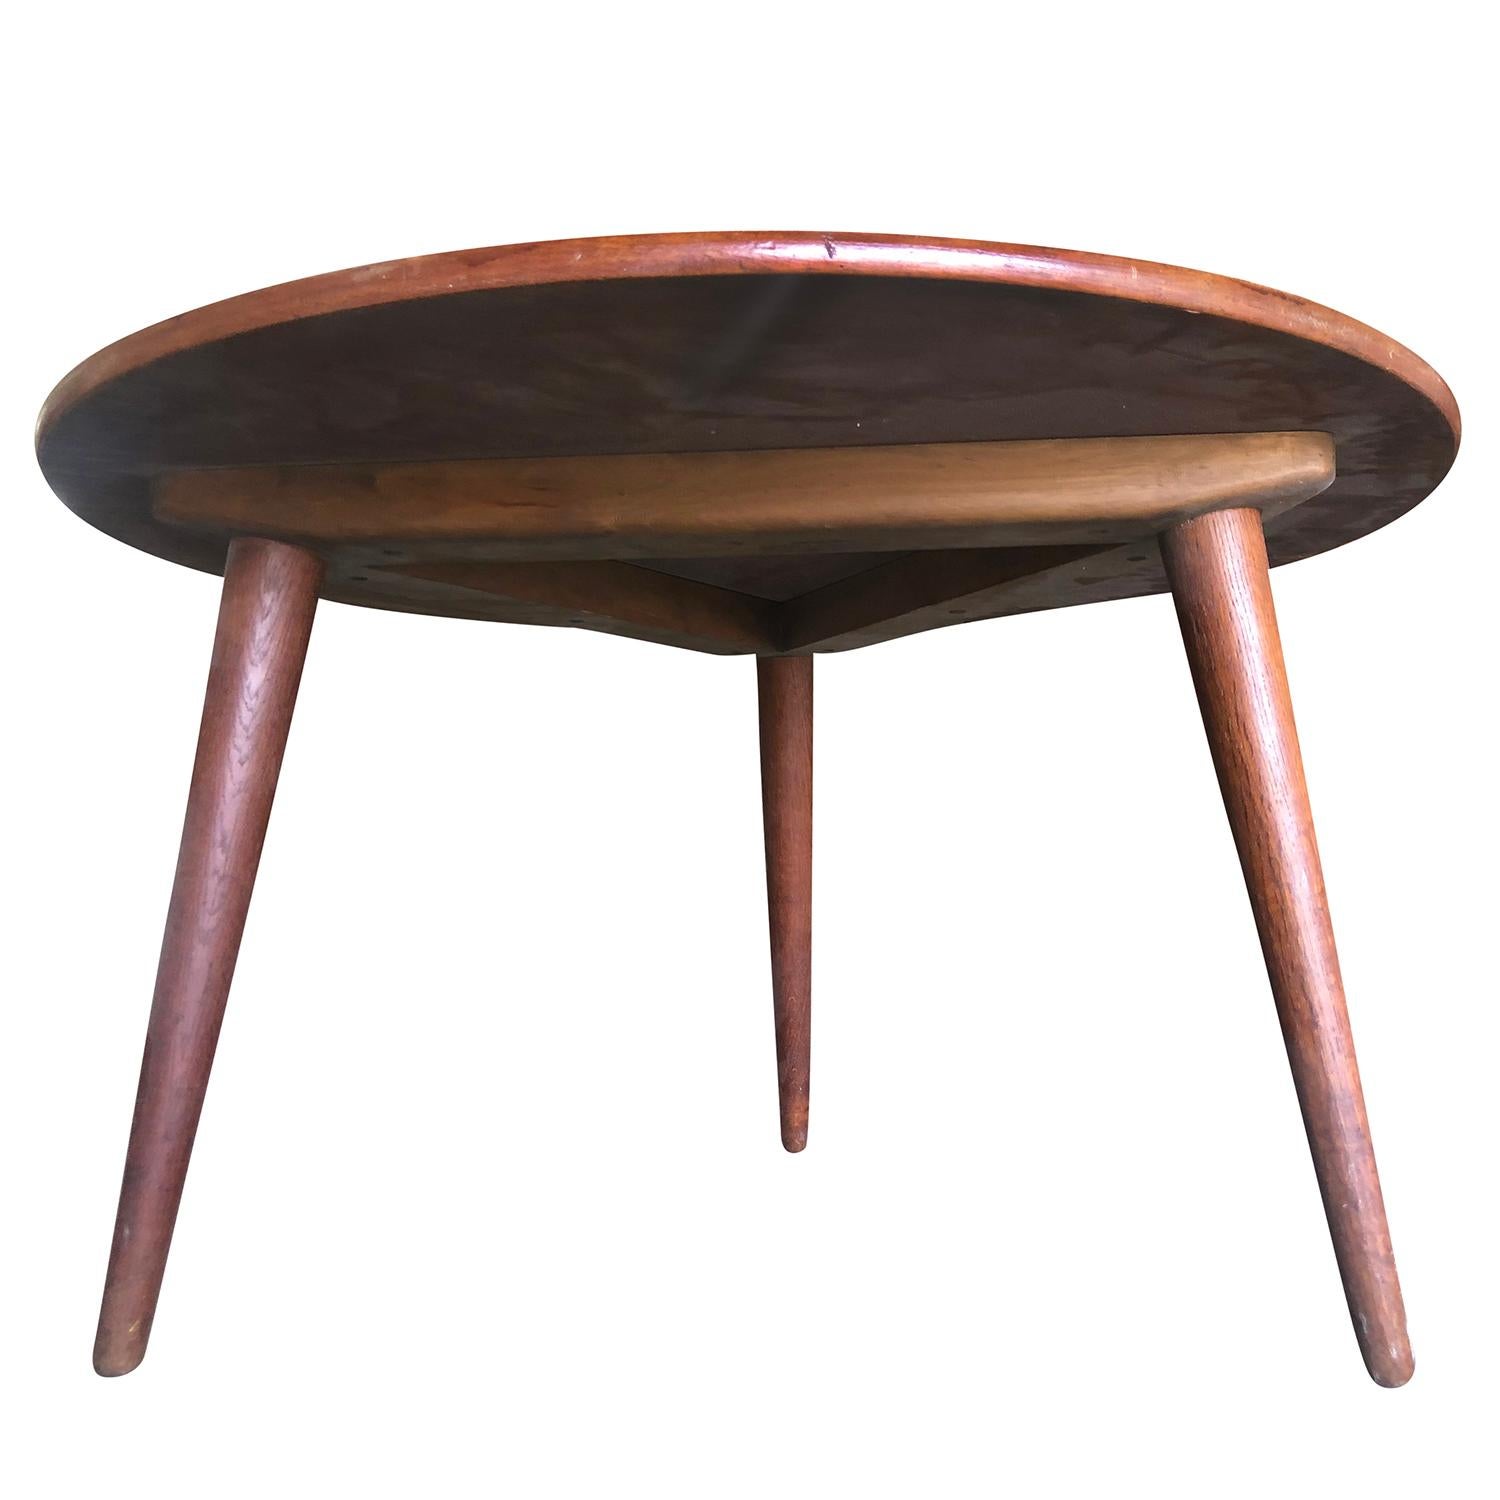 A vintage Mid-Century Modern round coffee table made of hand crafted Teakwood. The Danish side table was designed by Hans J. Wegner and produced by Andreas Tuck, in good condition. Wear consistent with age and use, circa 1950-1960, Denmark,